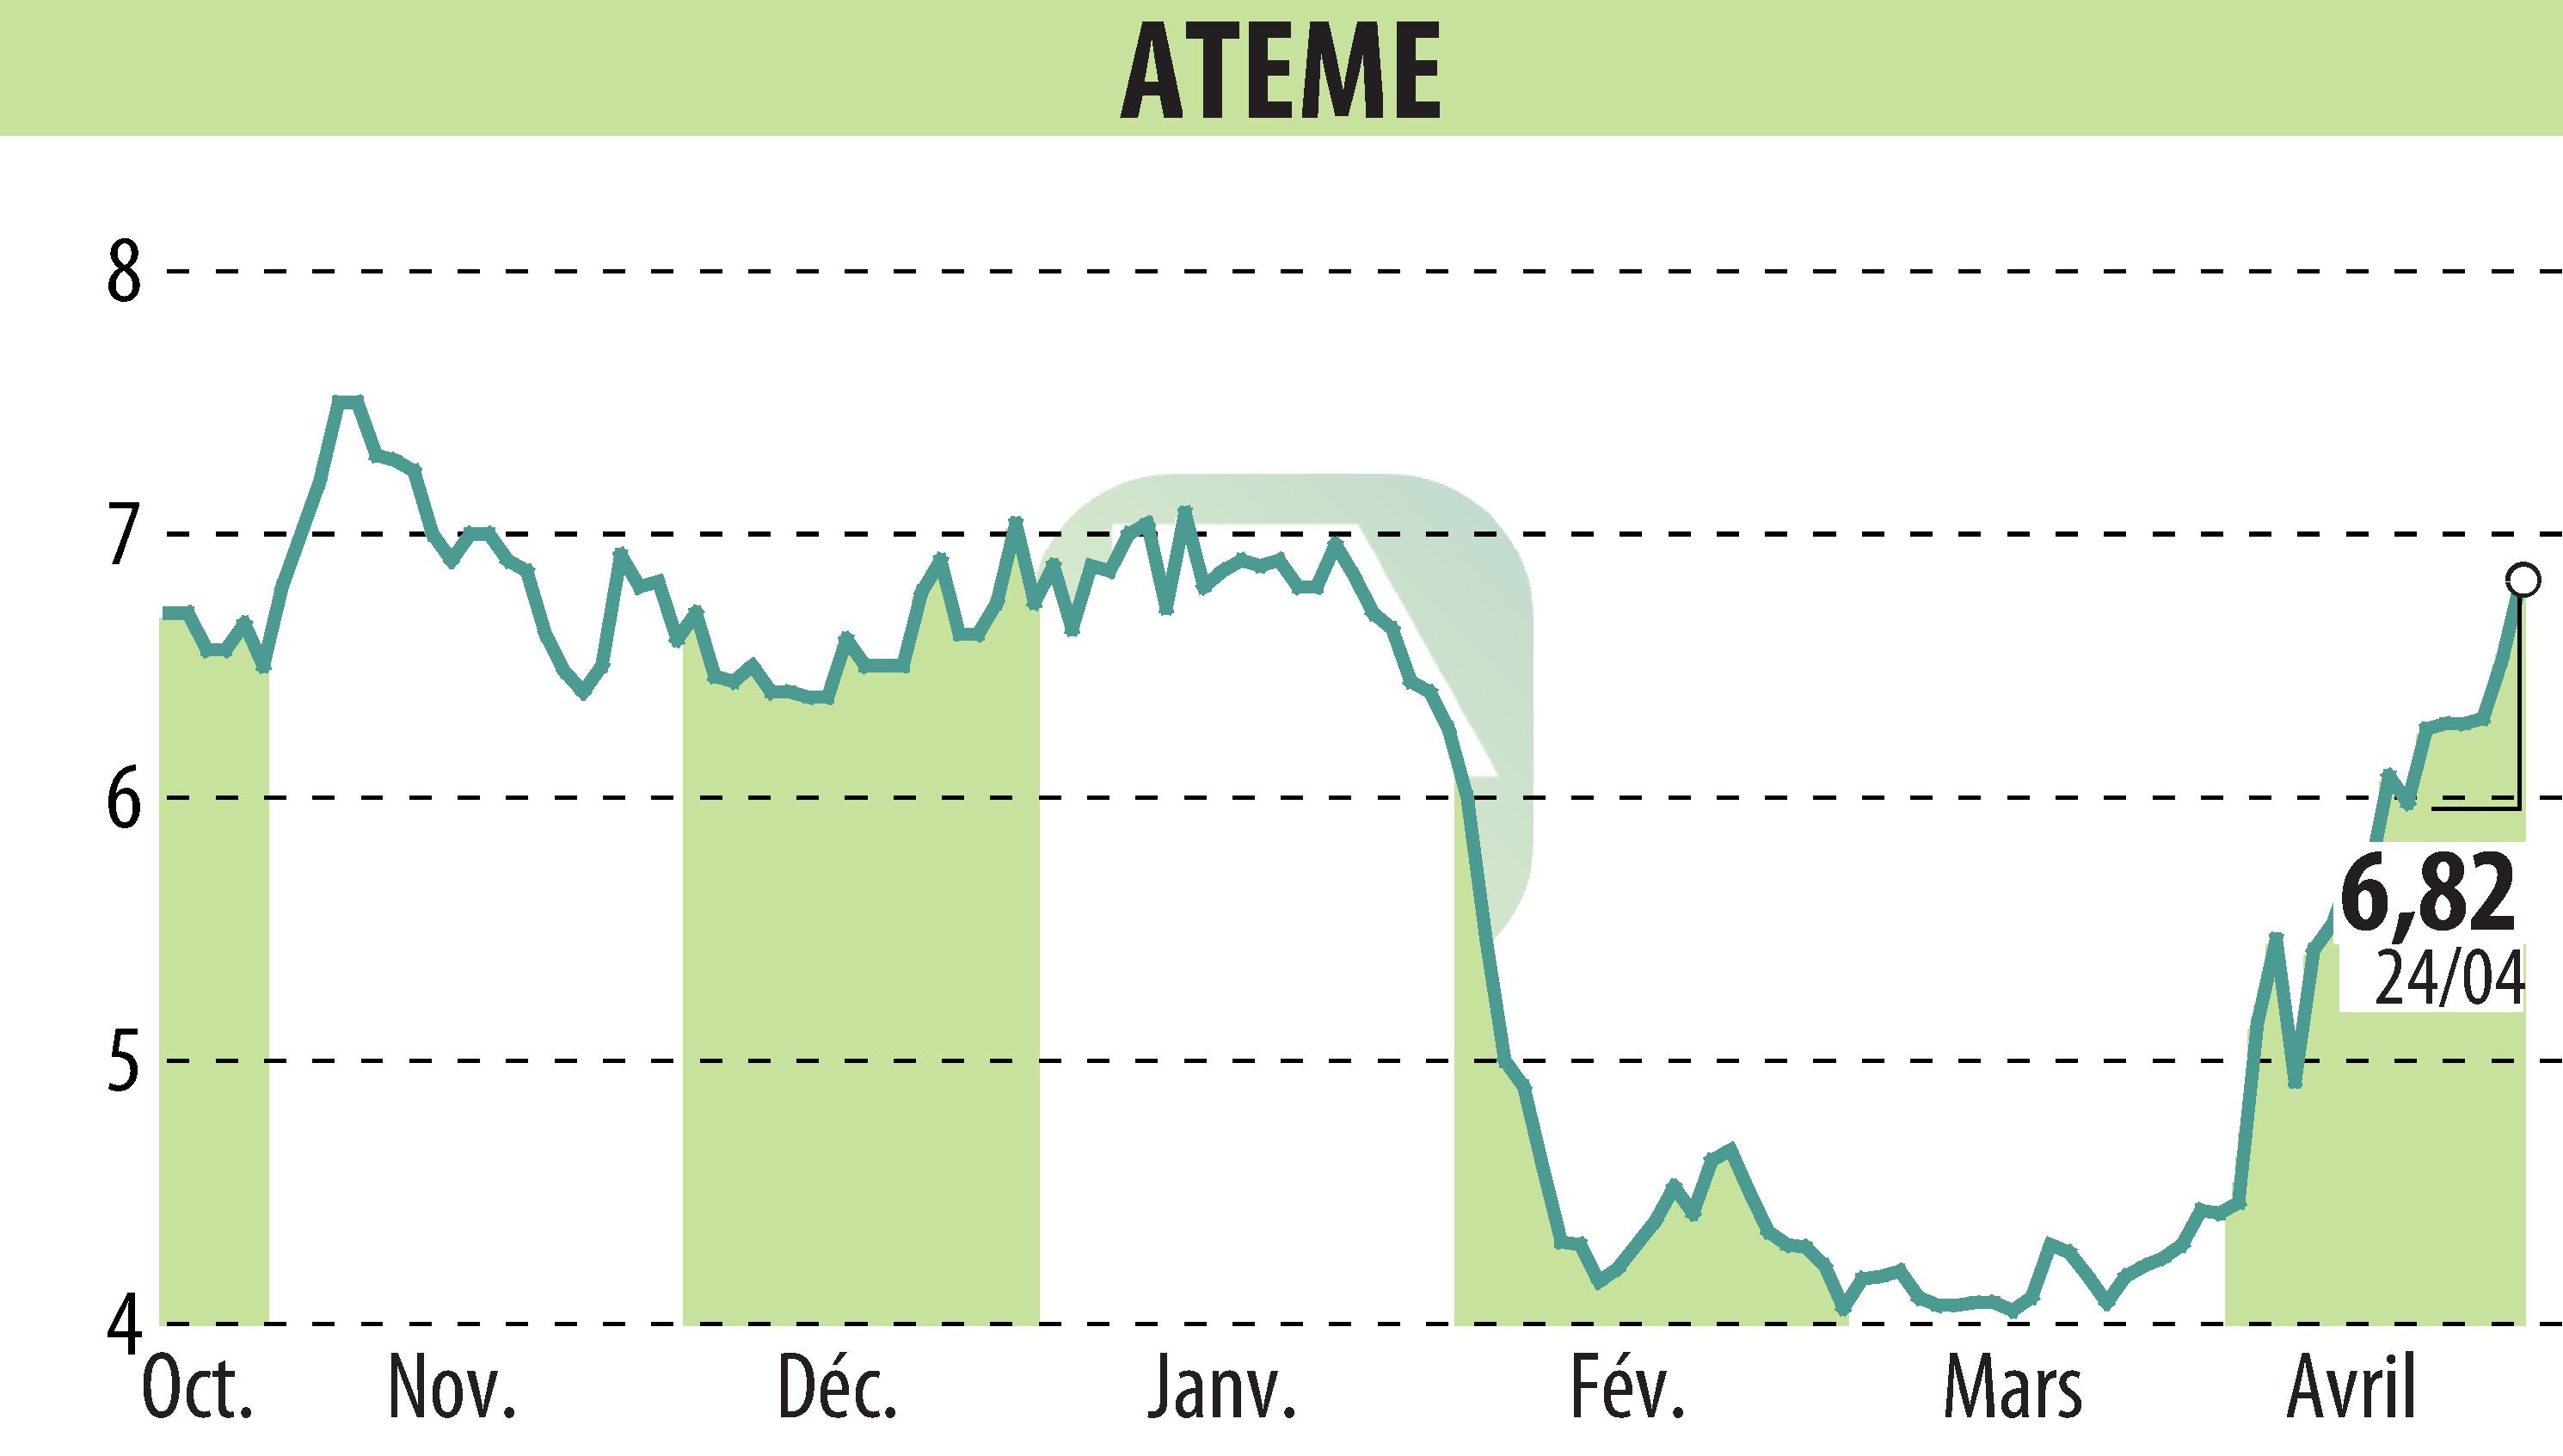 Stock price chart of ATEME (EPA:ATEME) showing fluctuations.